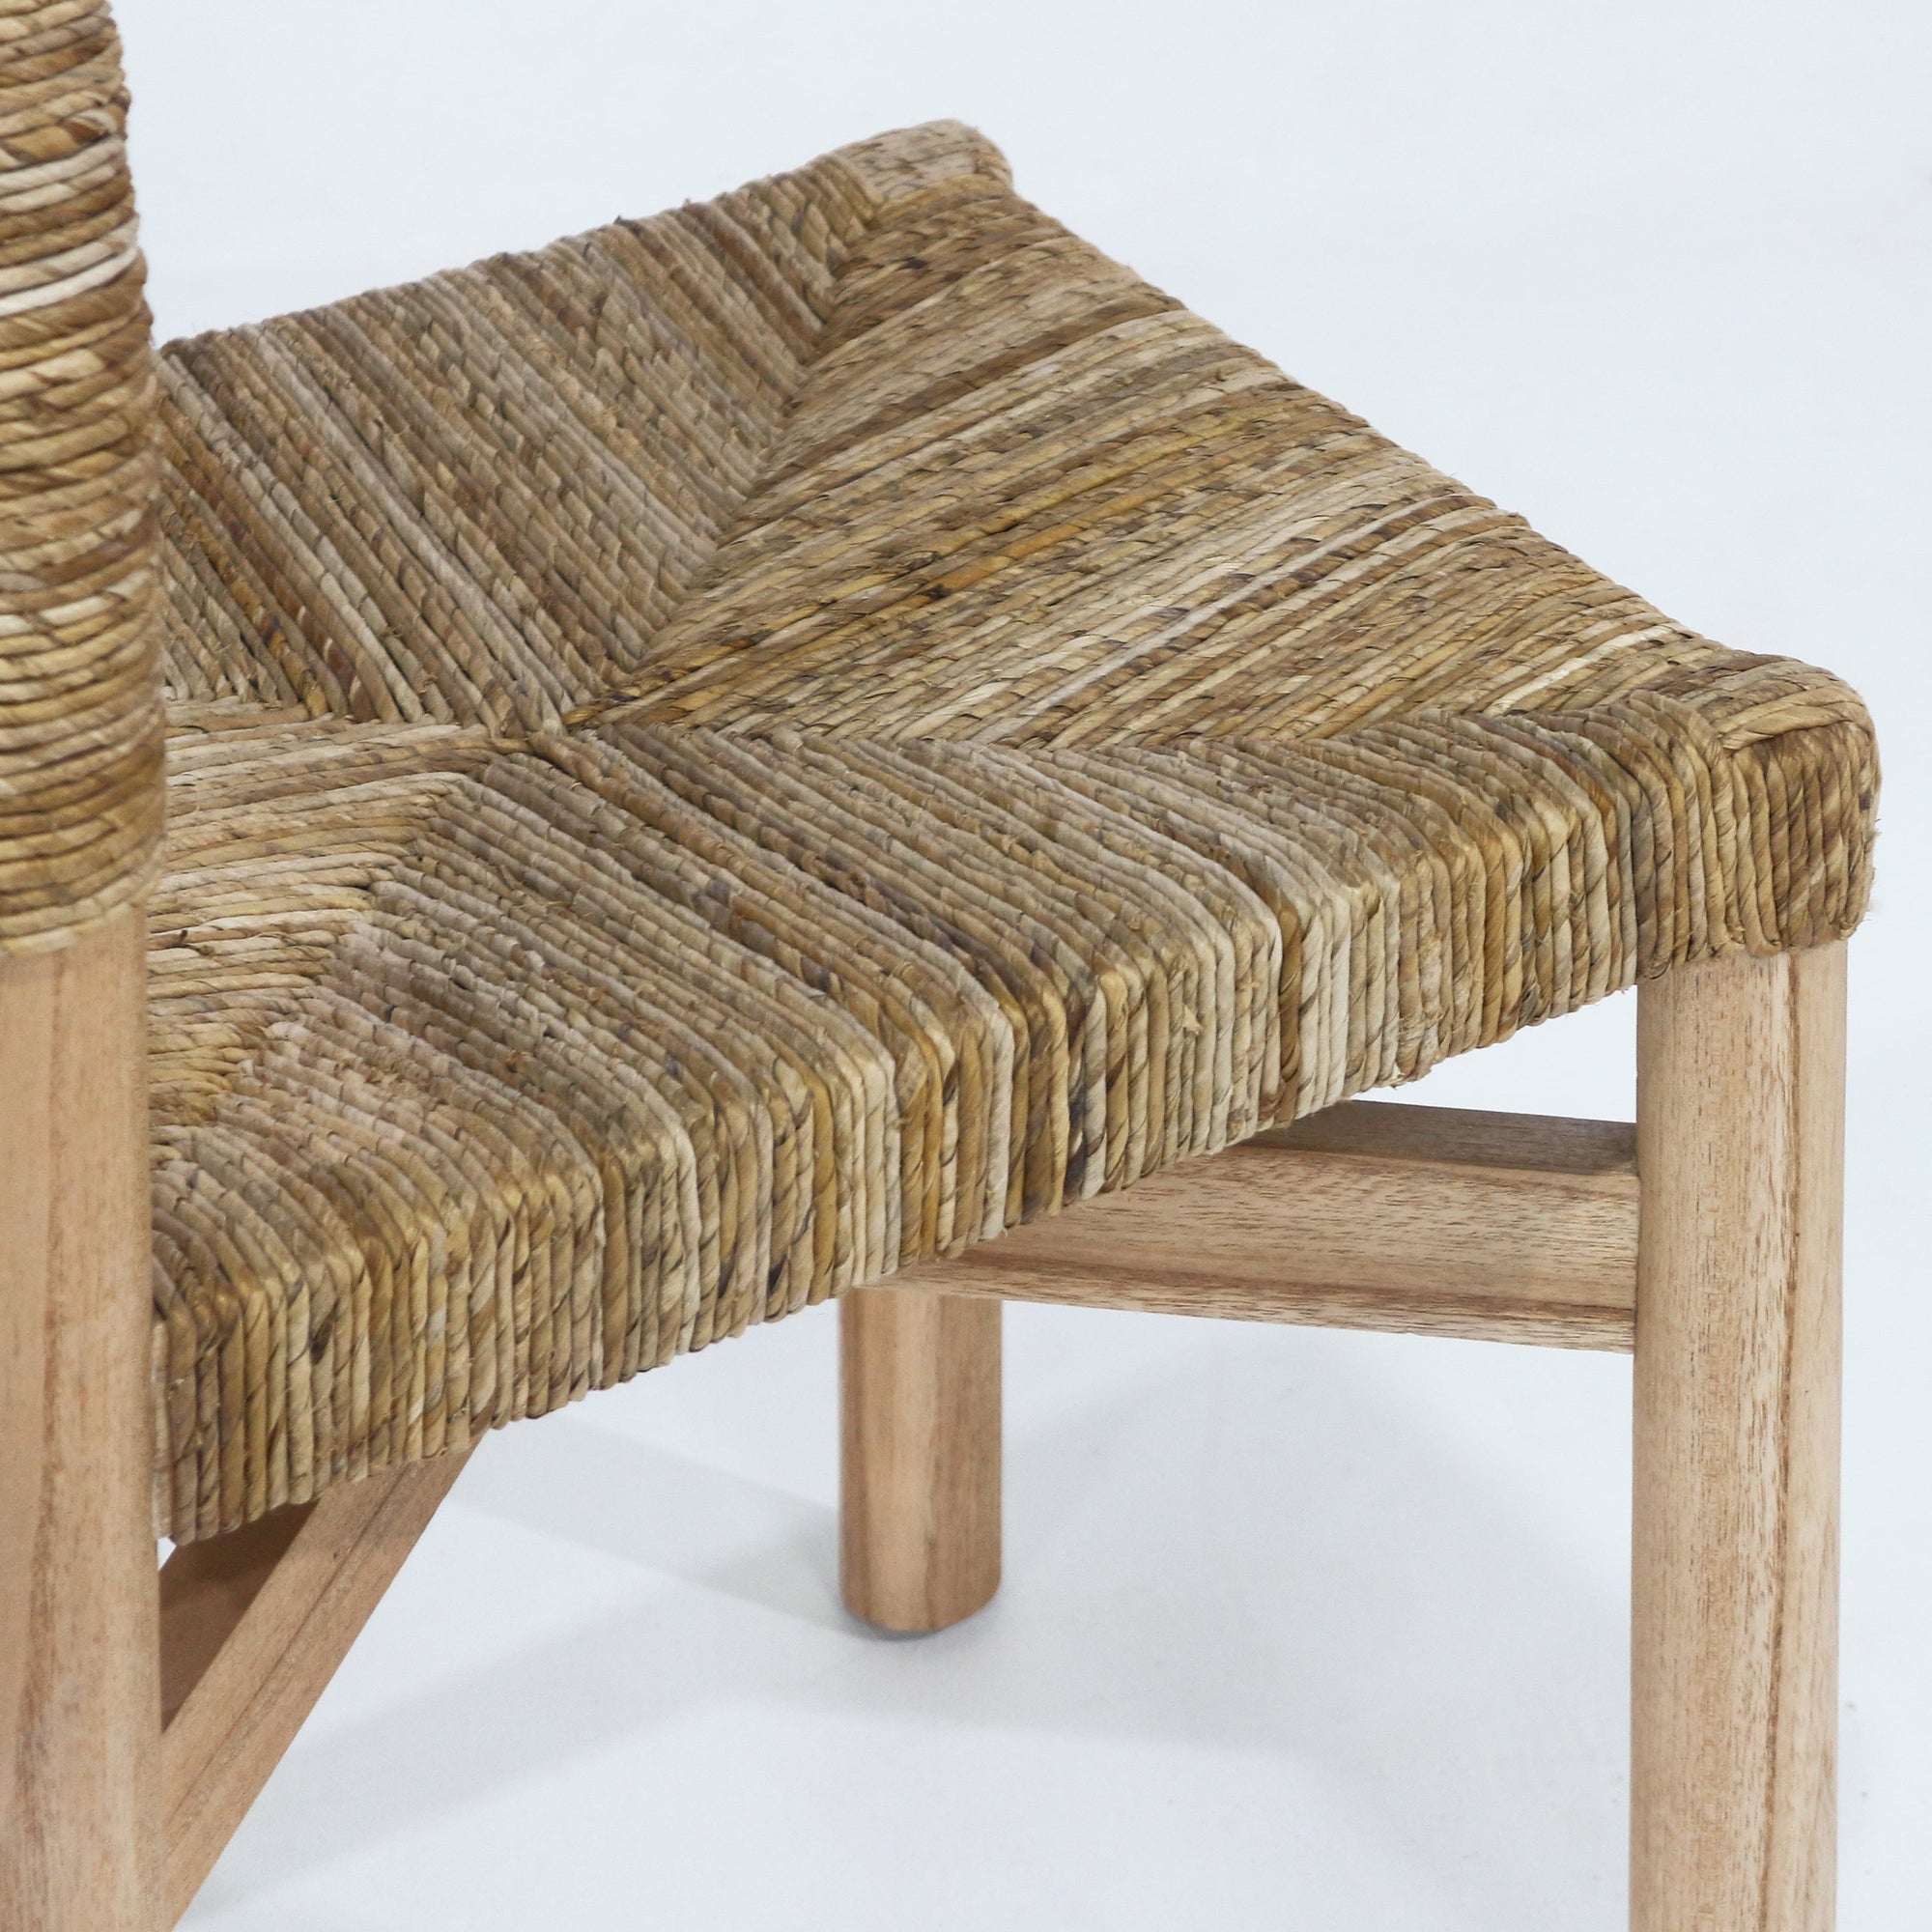 Sarande Dining Chair in Teak and Seagrass - INTERIORTONIC